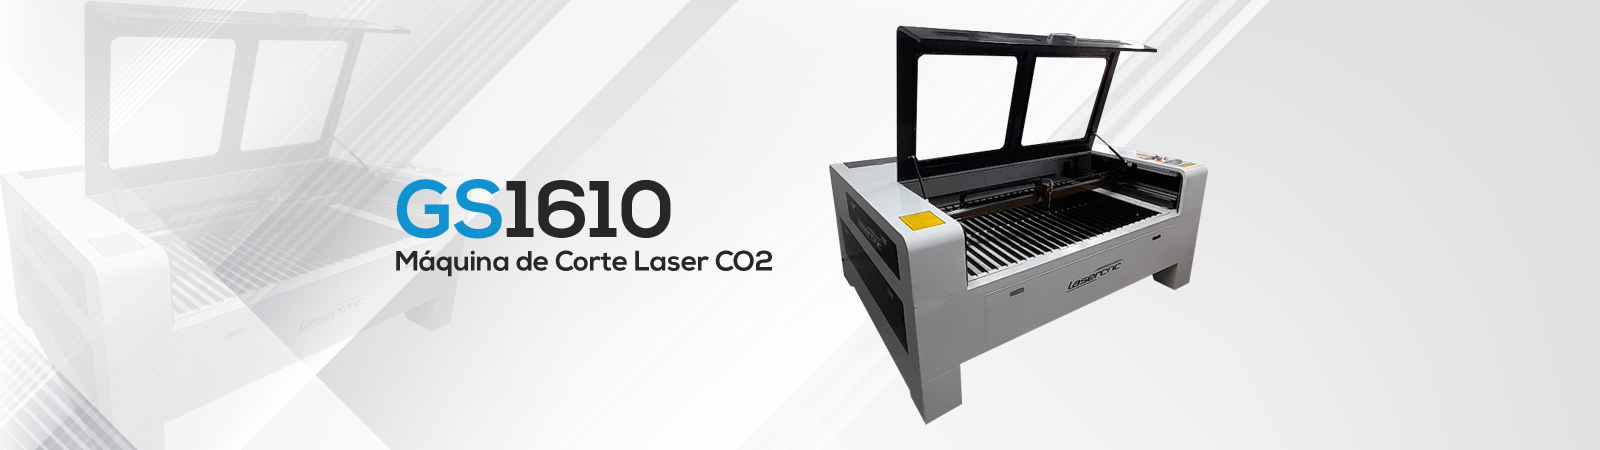 Maquina_Laser_CO2_GS1610_Banner_01